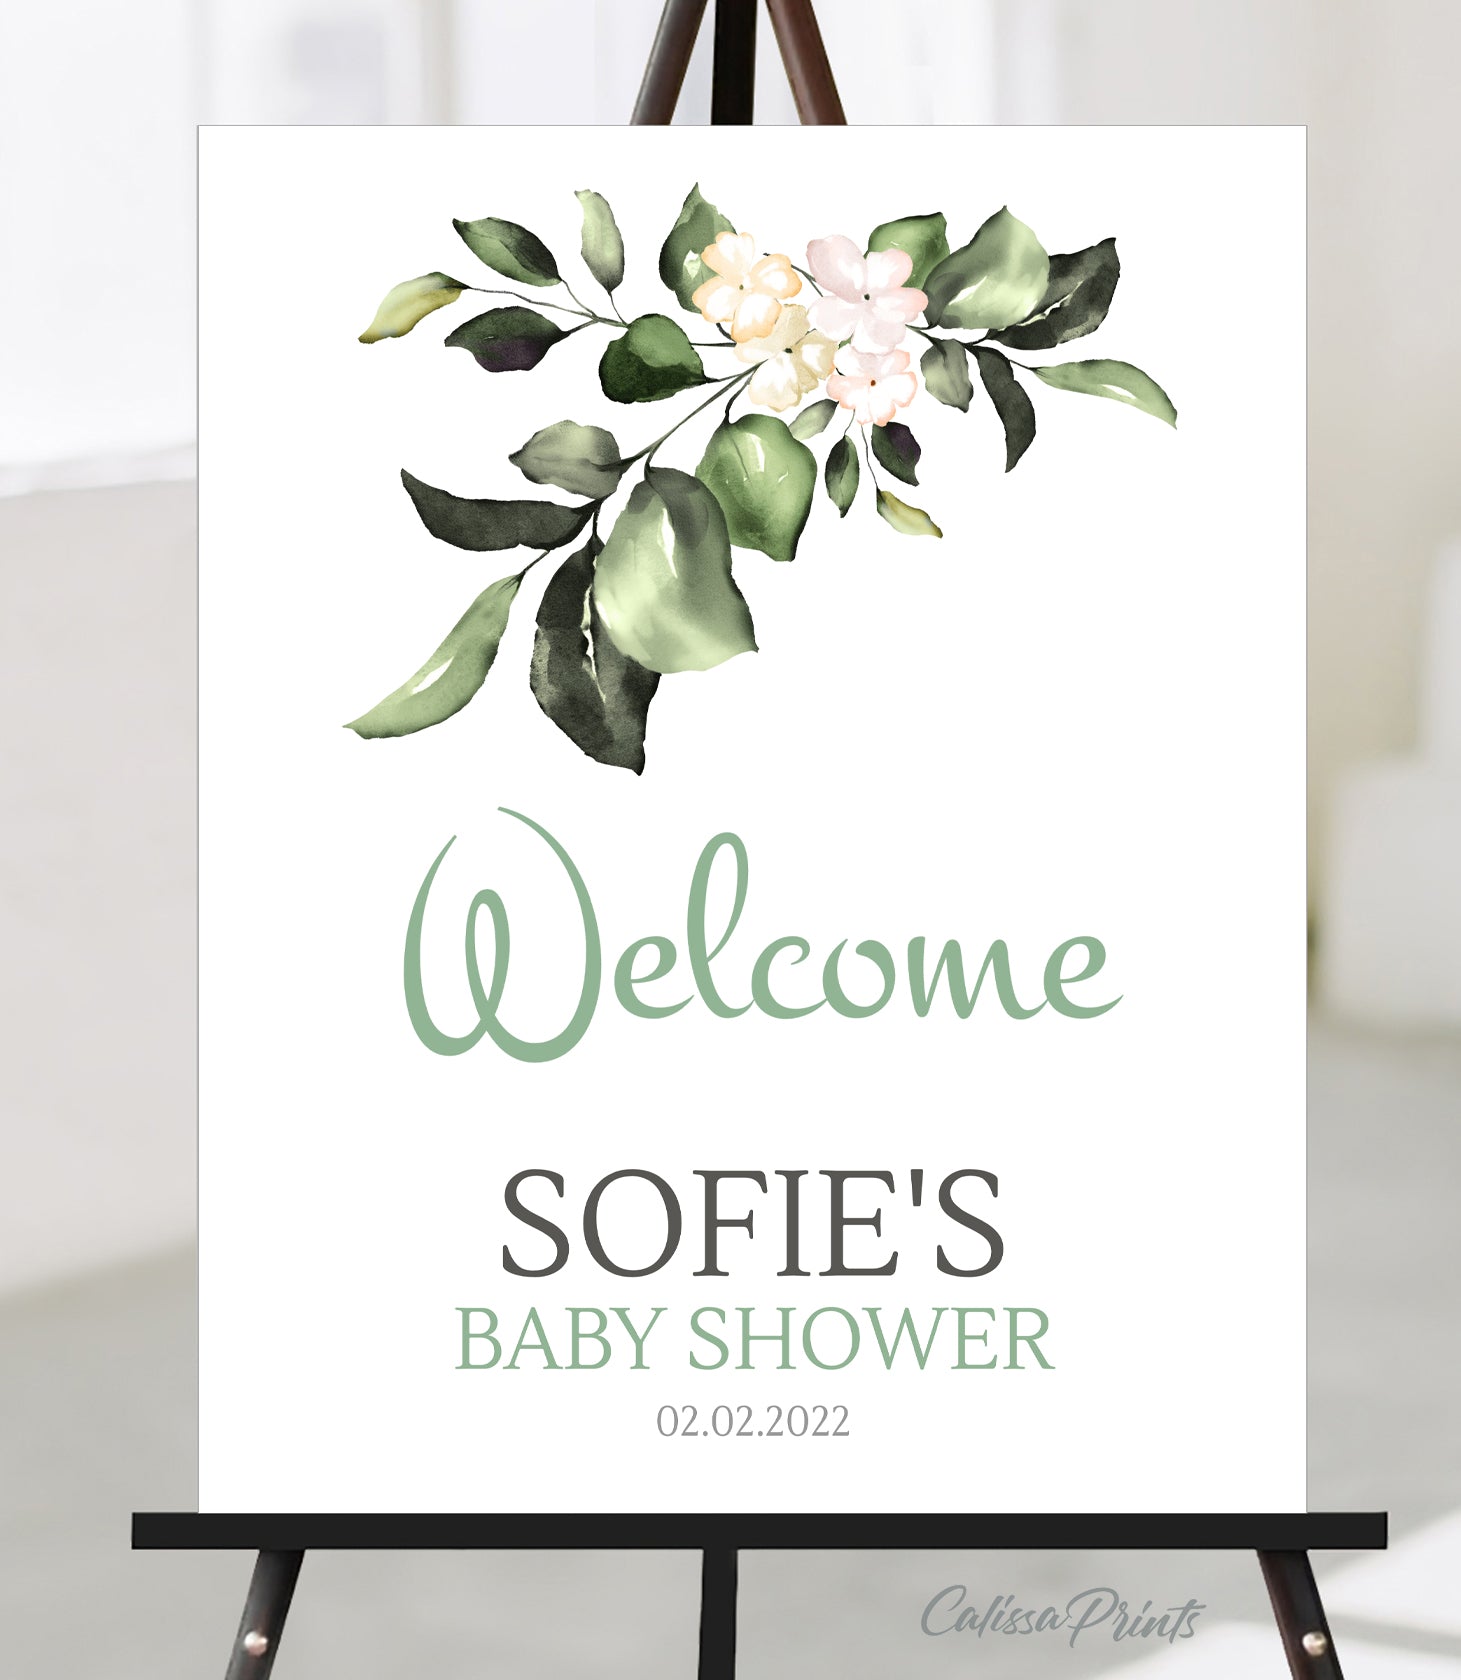 Baby Shower Welcome Signs Templates, Greenery Bouquet Design - BABY06